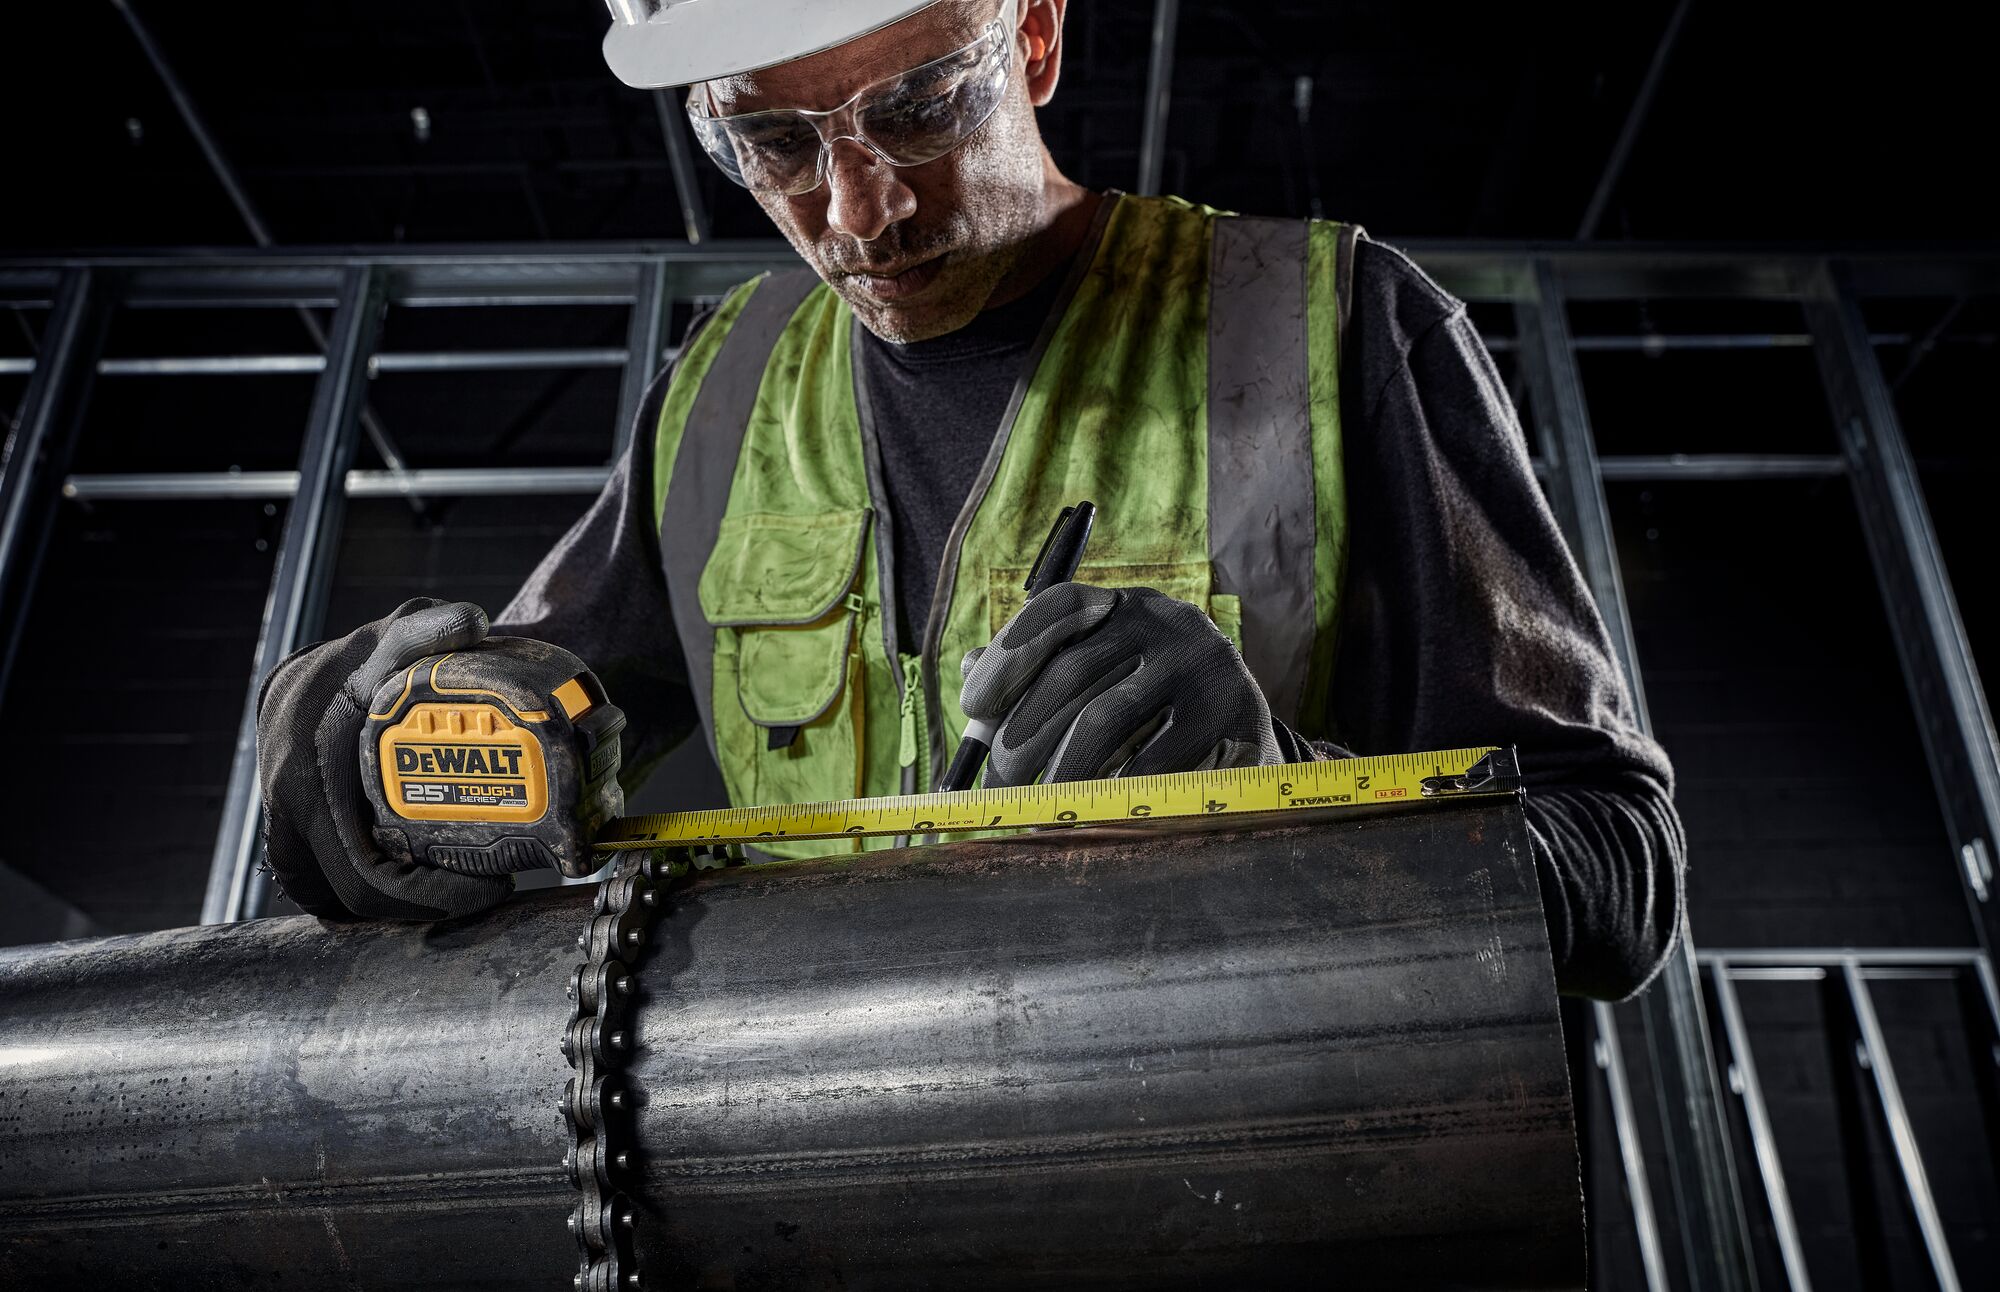 Tough Series 25 feet Tape Measure being used by worker to measure metal pipe at worksite.